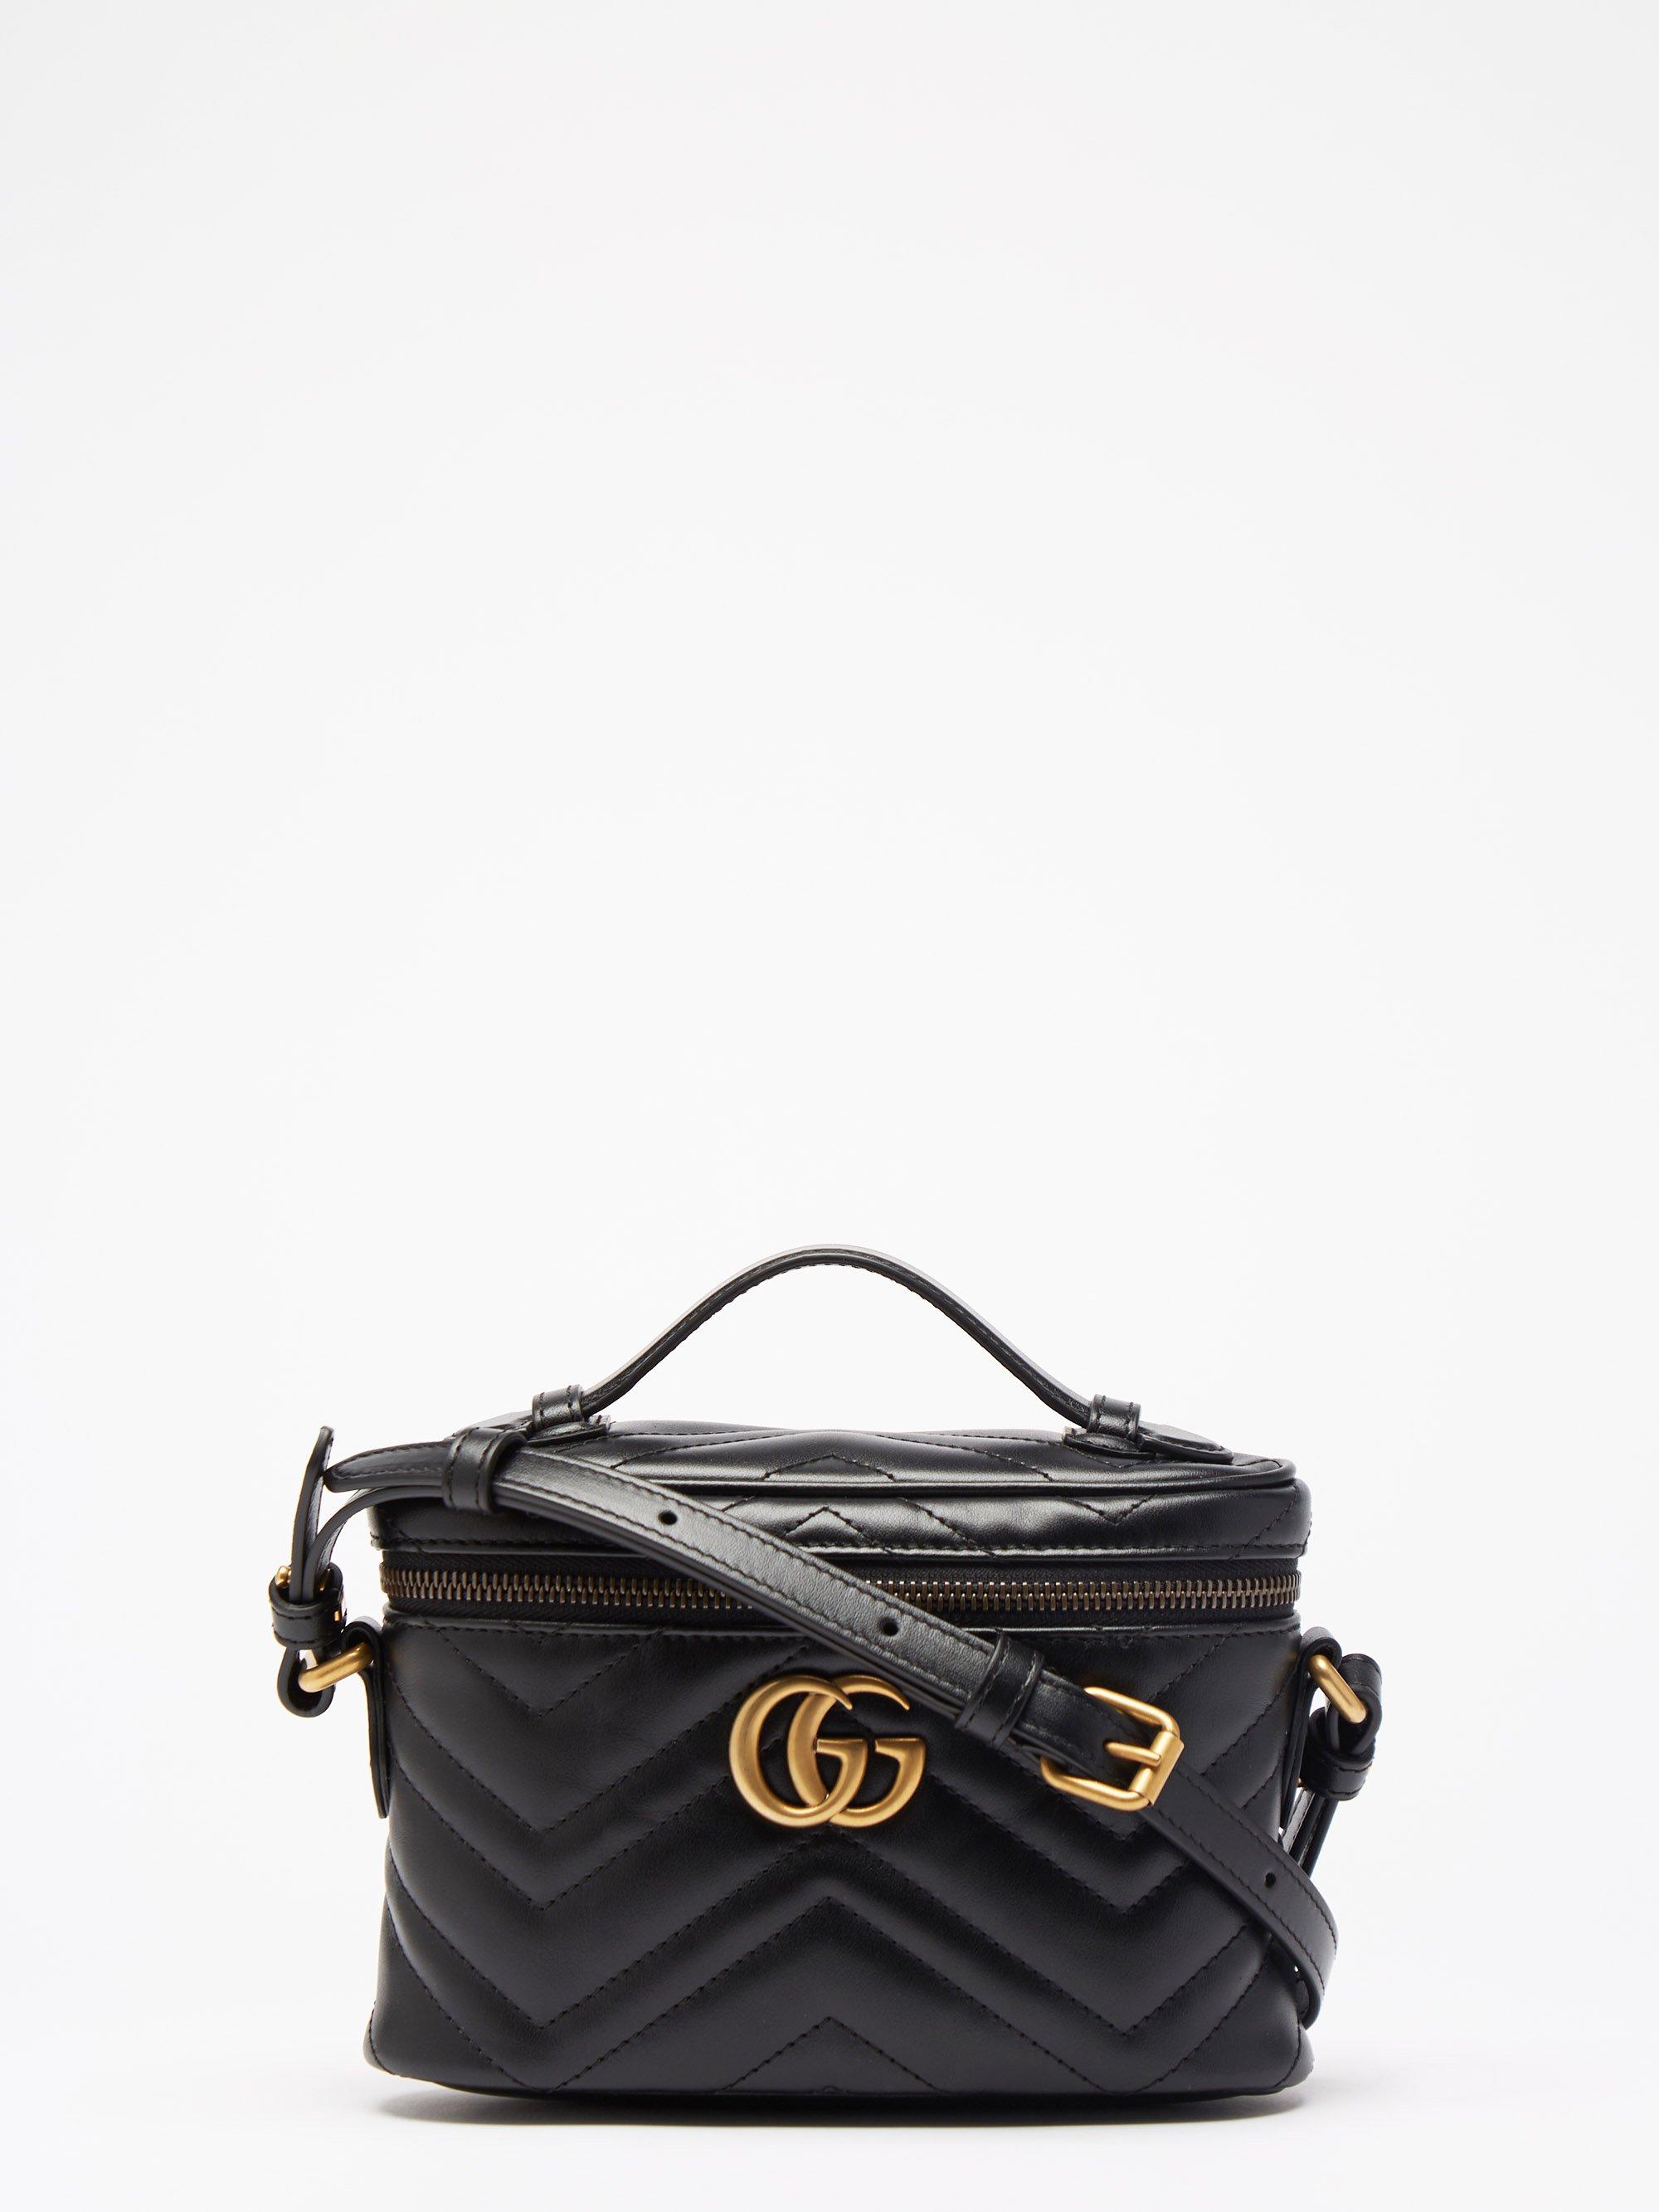 Gucci GG Marmont Vanity Mini Leather Cross-body Bag in Black | Lyst